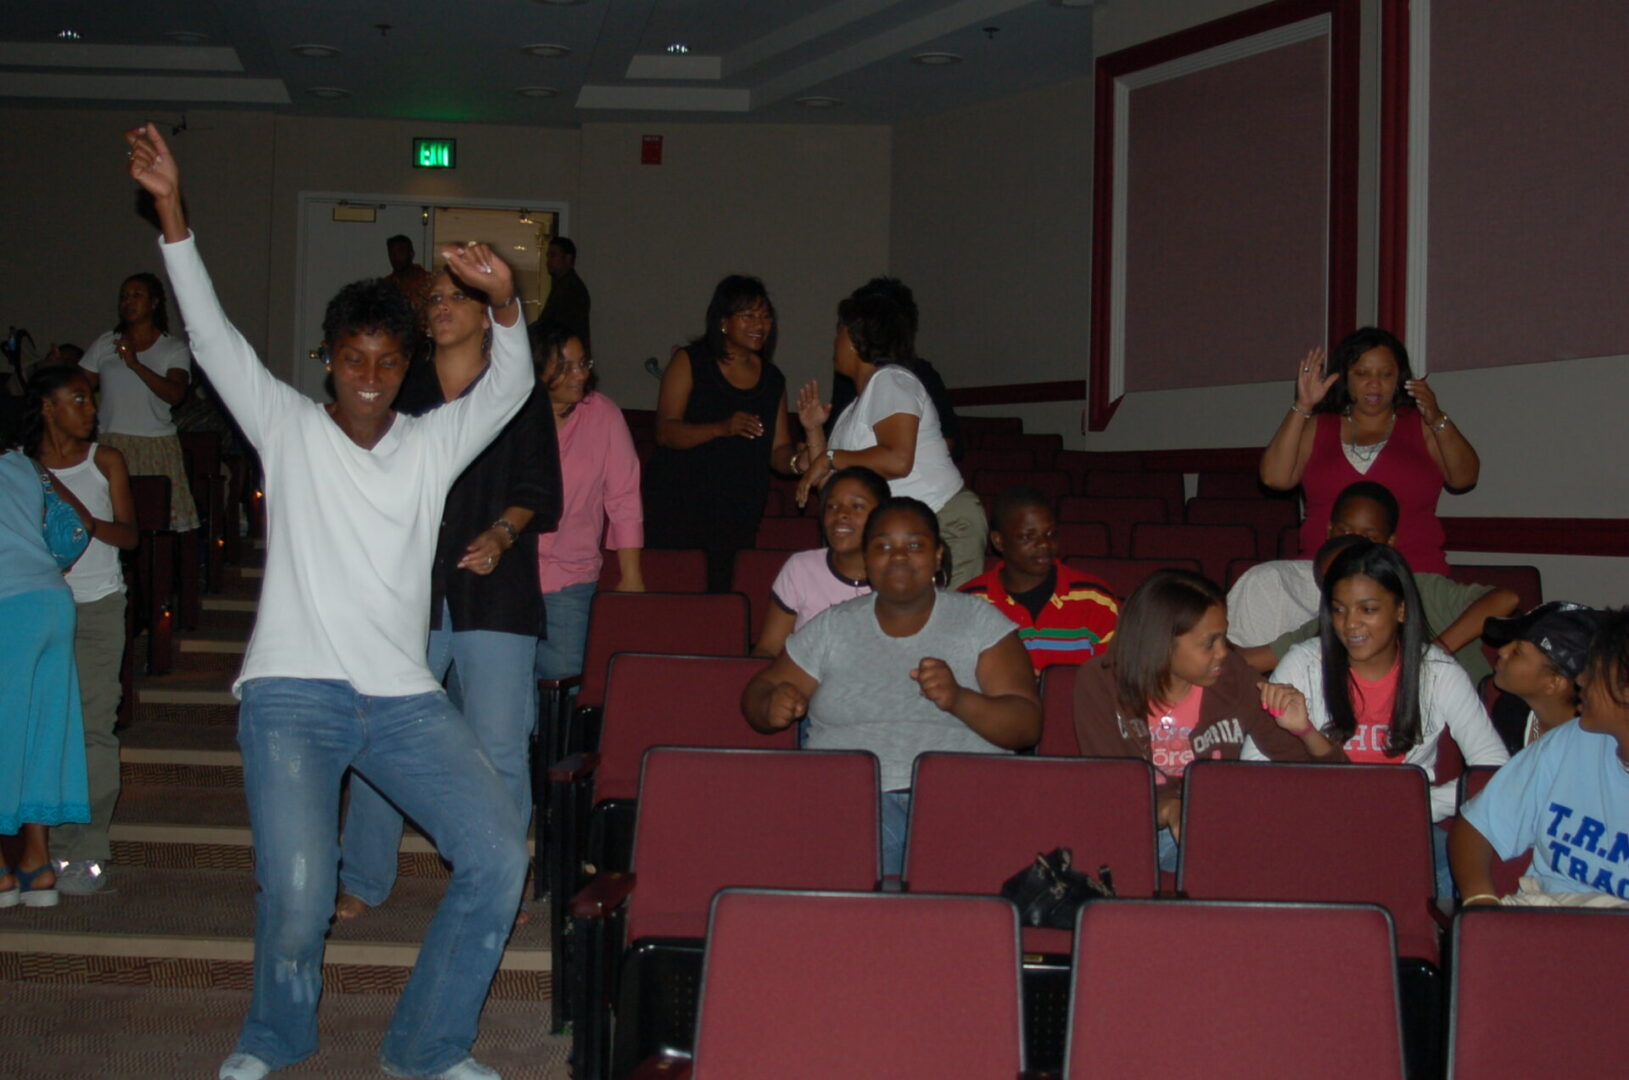 A group of people in the auditorium with one person jumping up and down.